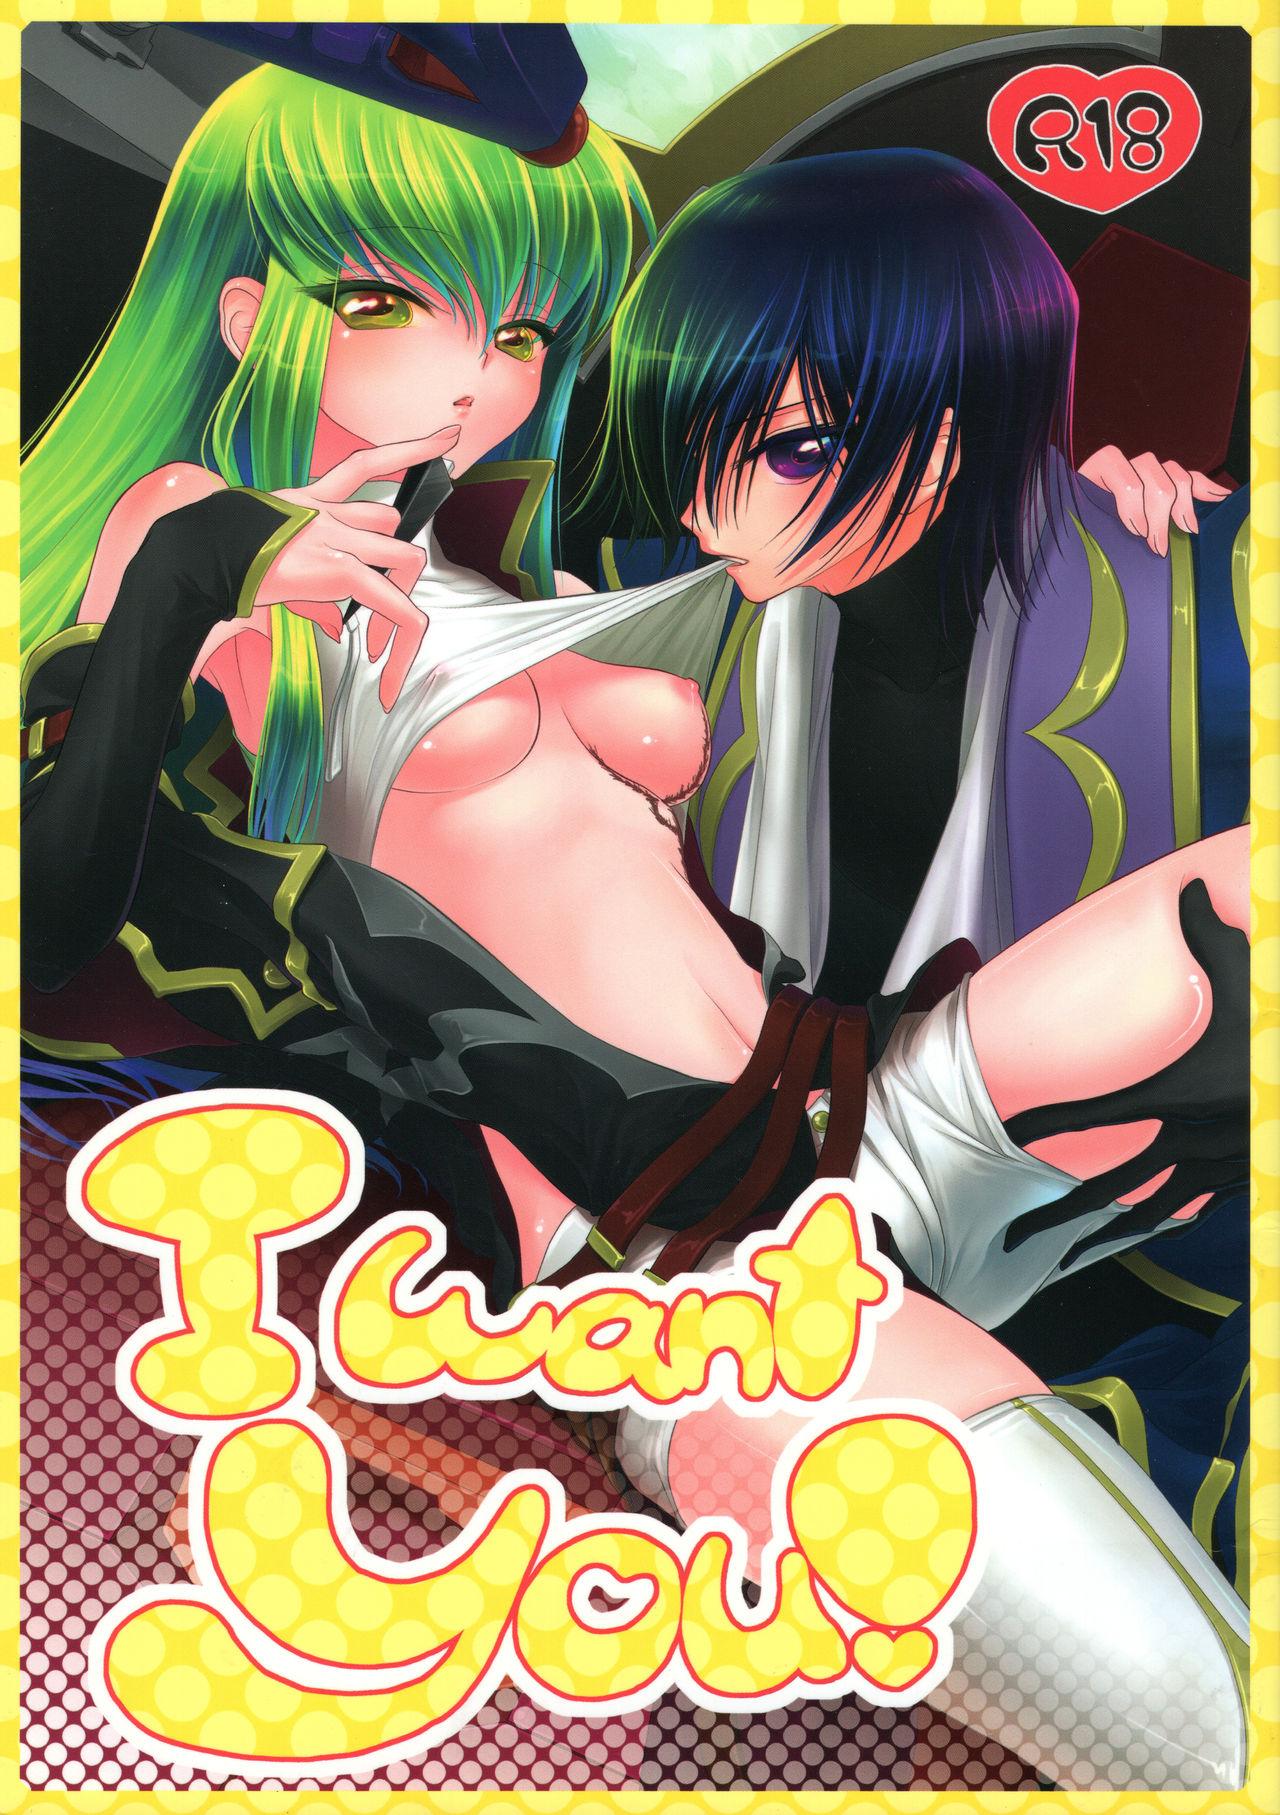 Pussy Lick I want you! - Code geass Pay - Page 1